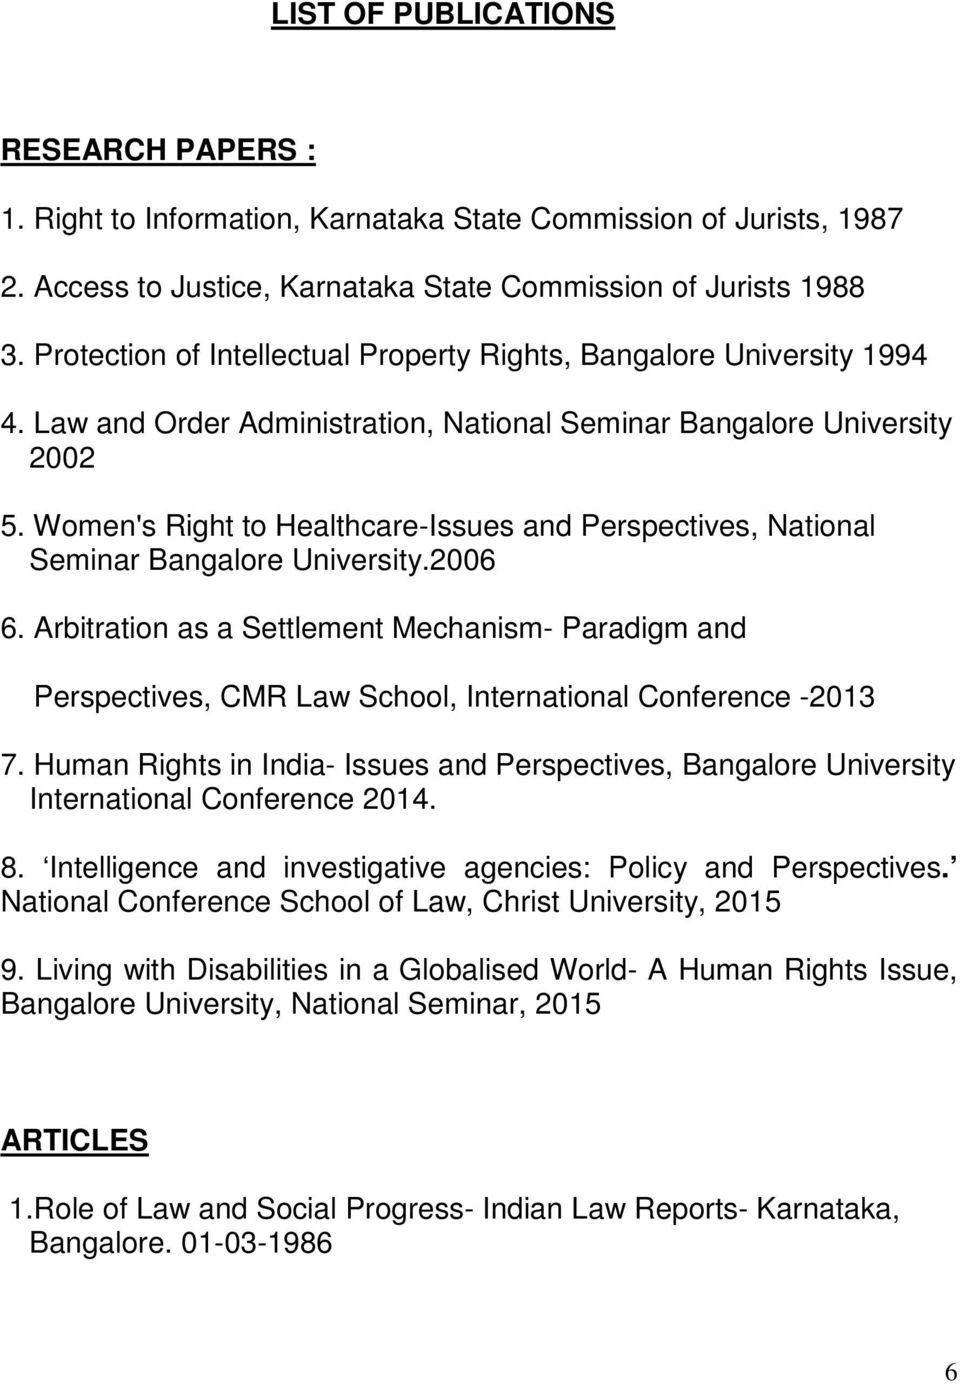 Women's Right to Healthcare-Issues and Perspectives, National Seminar Bangalore University.2006 6.